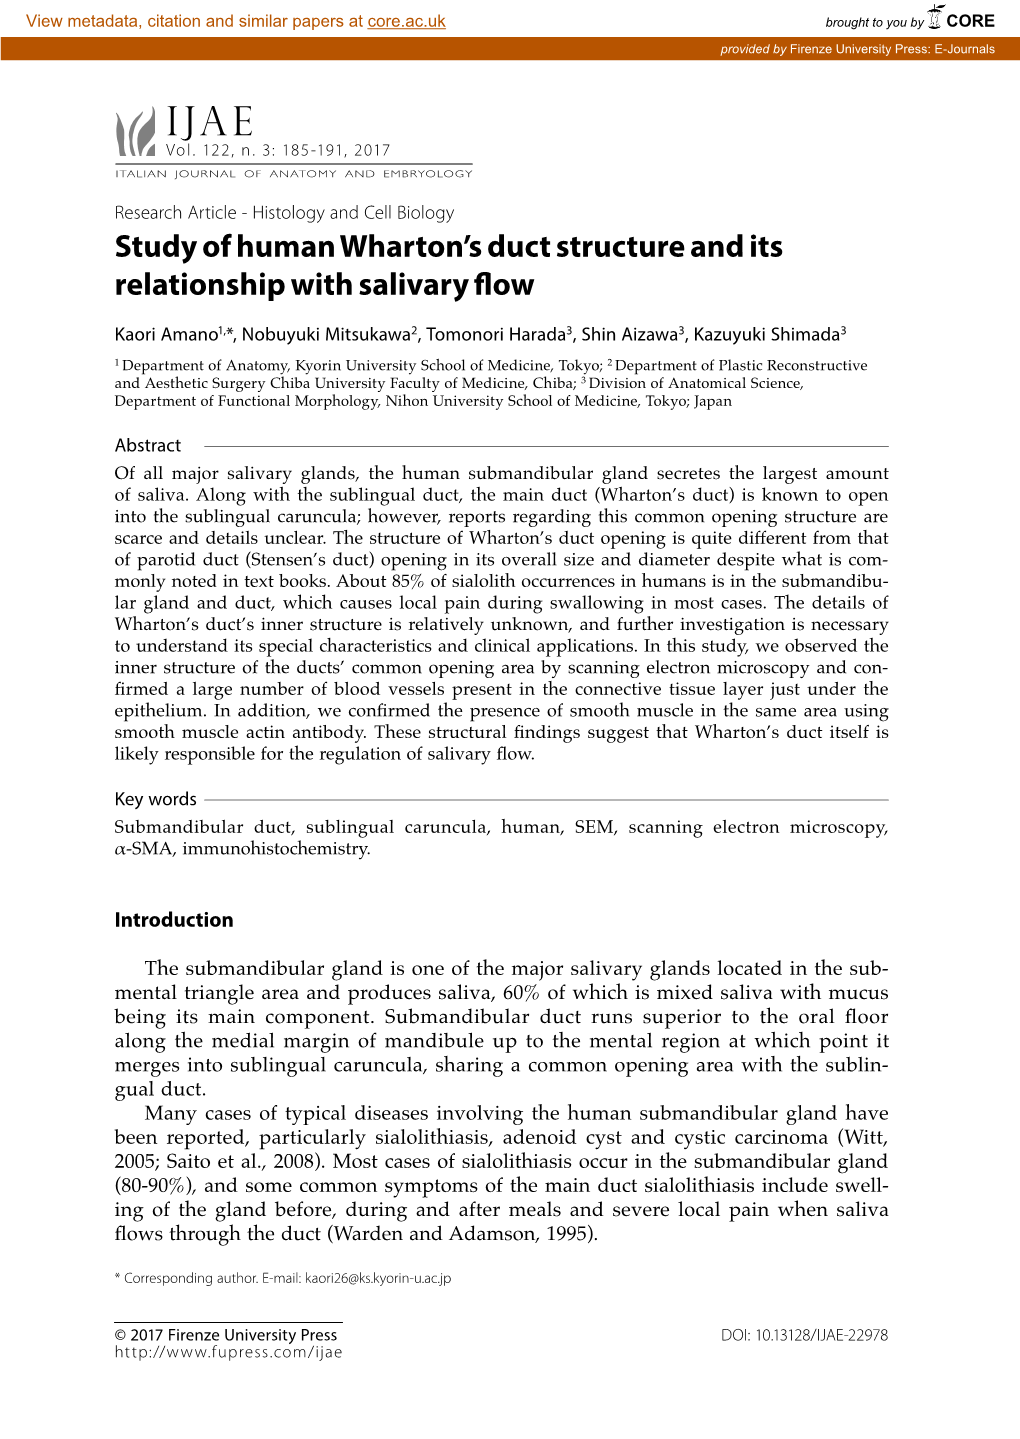 Study of Human Wharton's Duct Structure and Its Relationship With